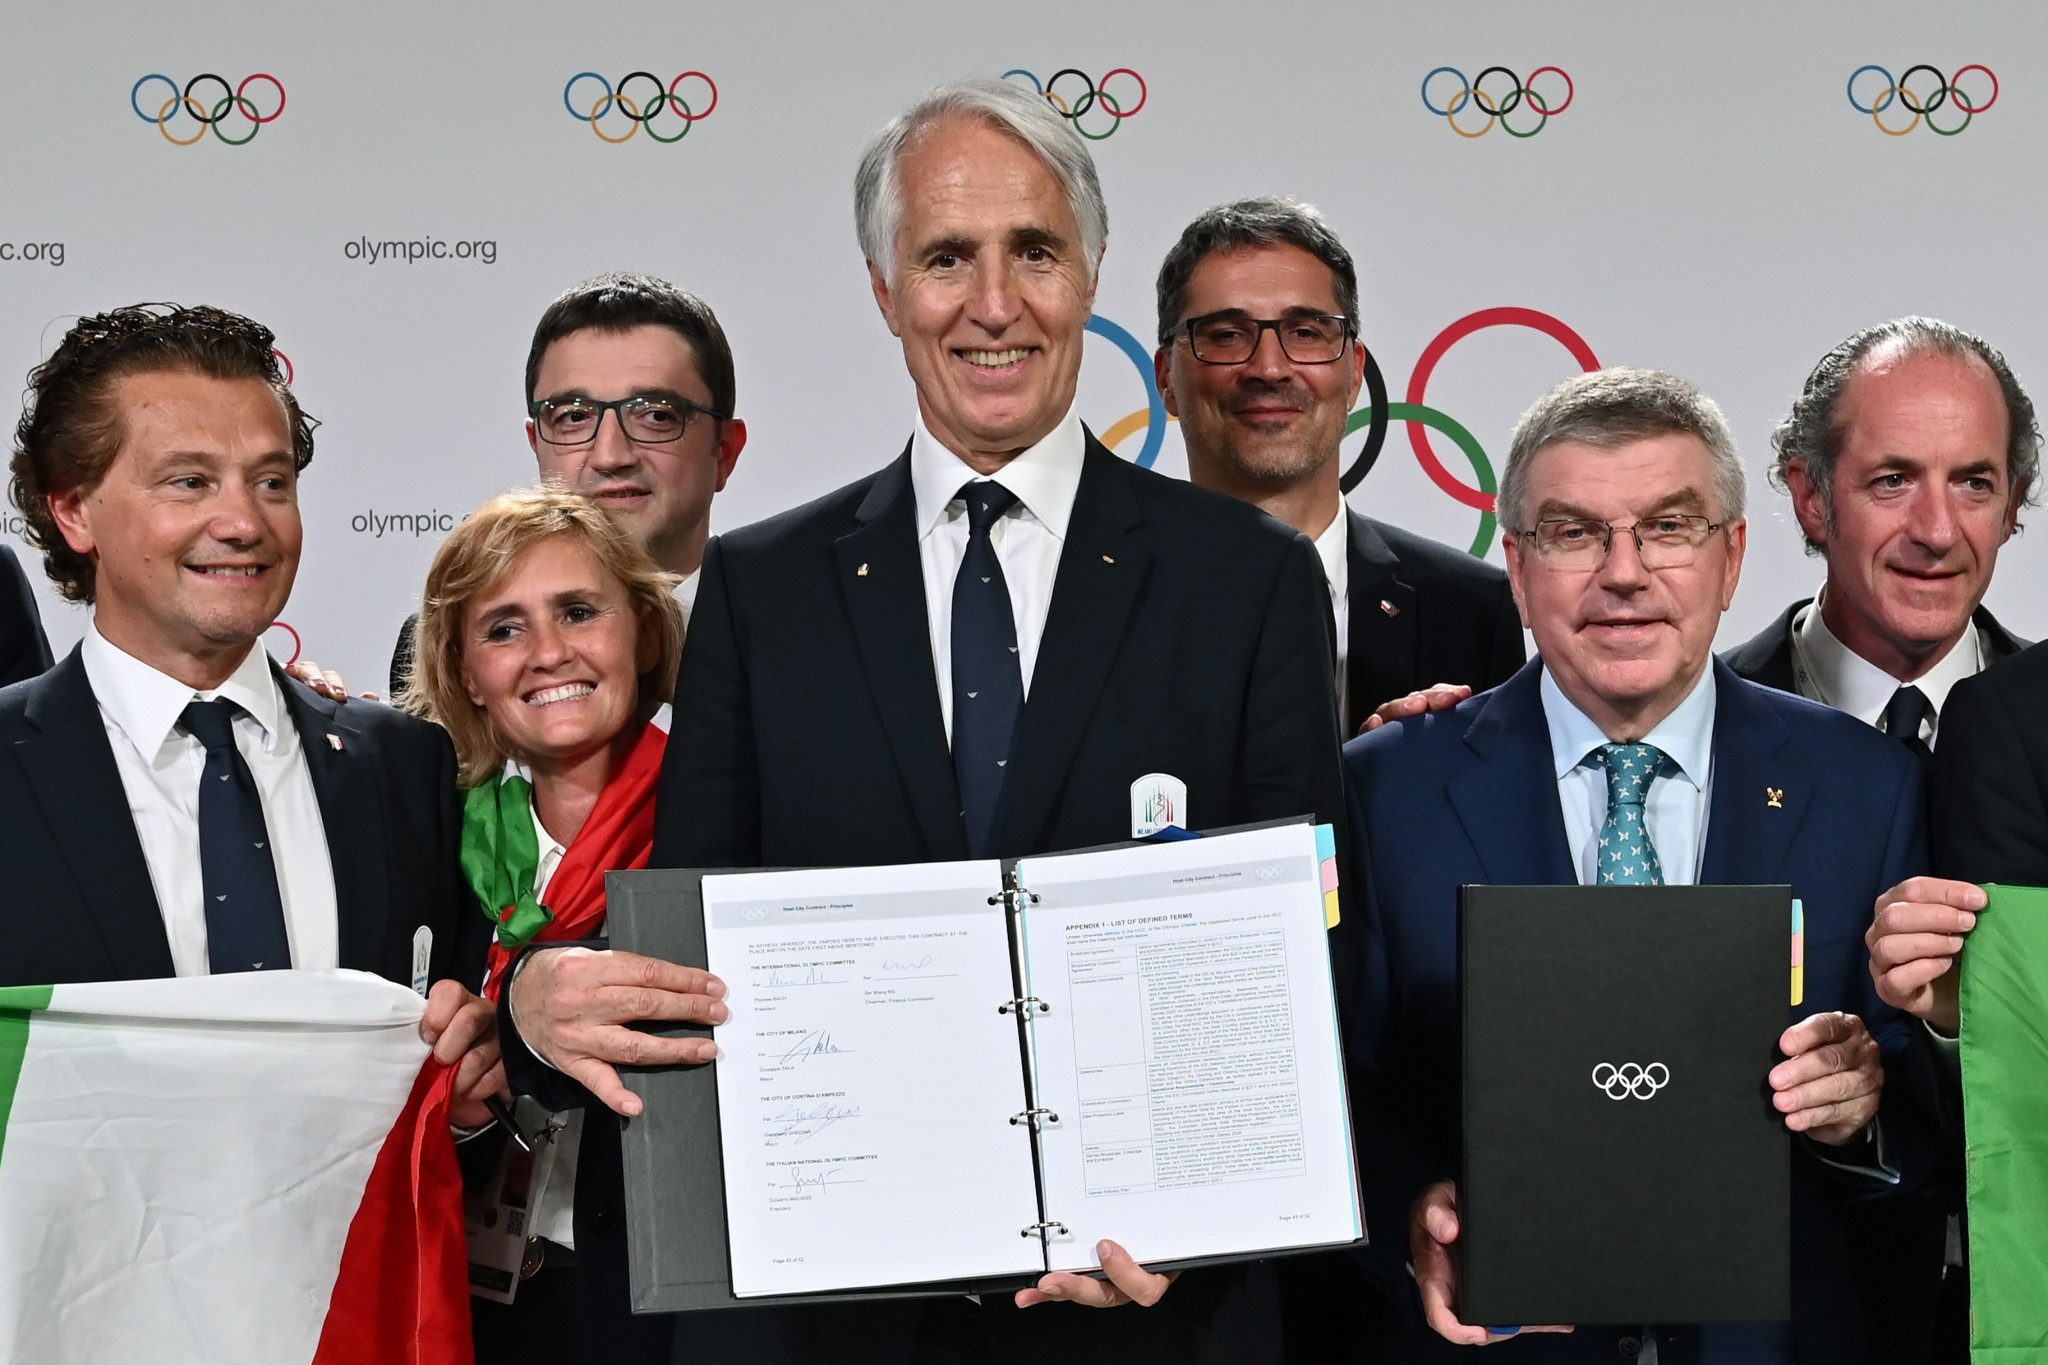 Milan Cortina 2026 will have less than seven years to prepare for hosting the Games ©Getty Images